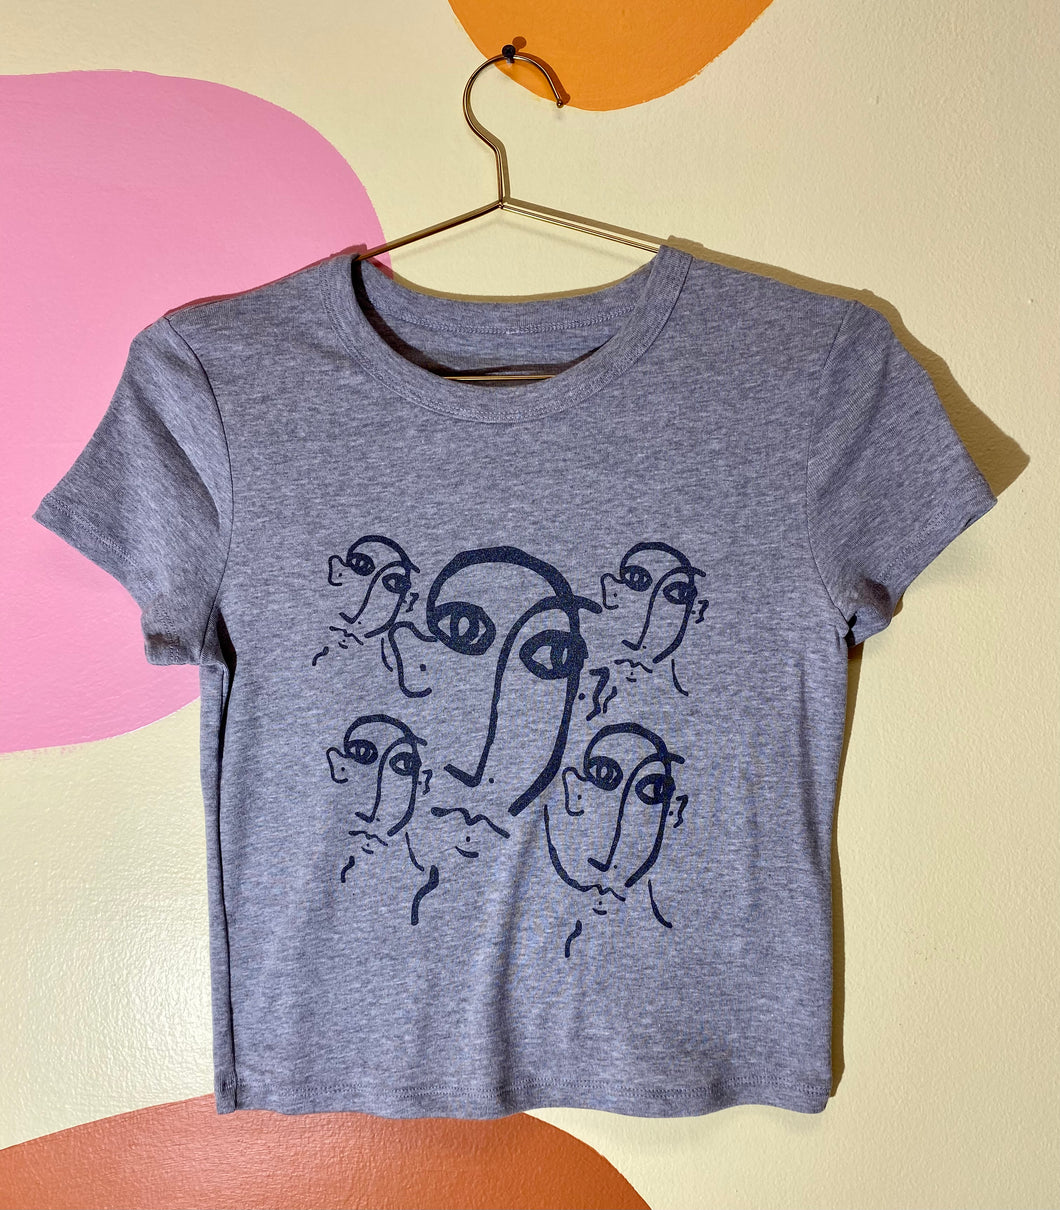 Faces on faces grey baby tee